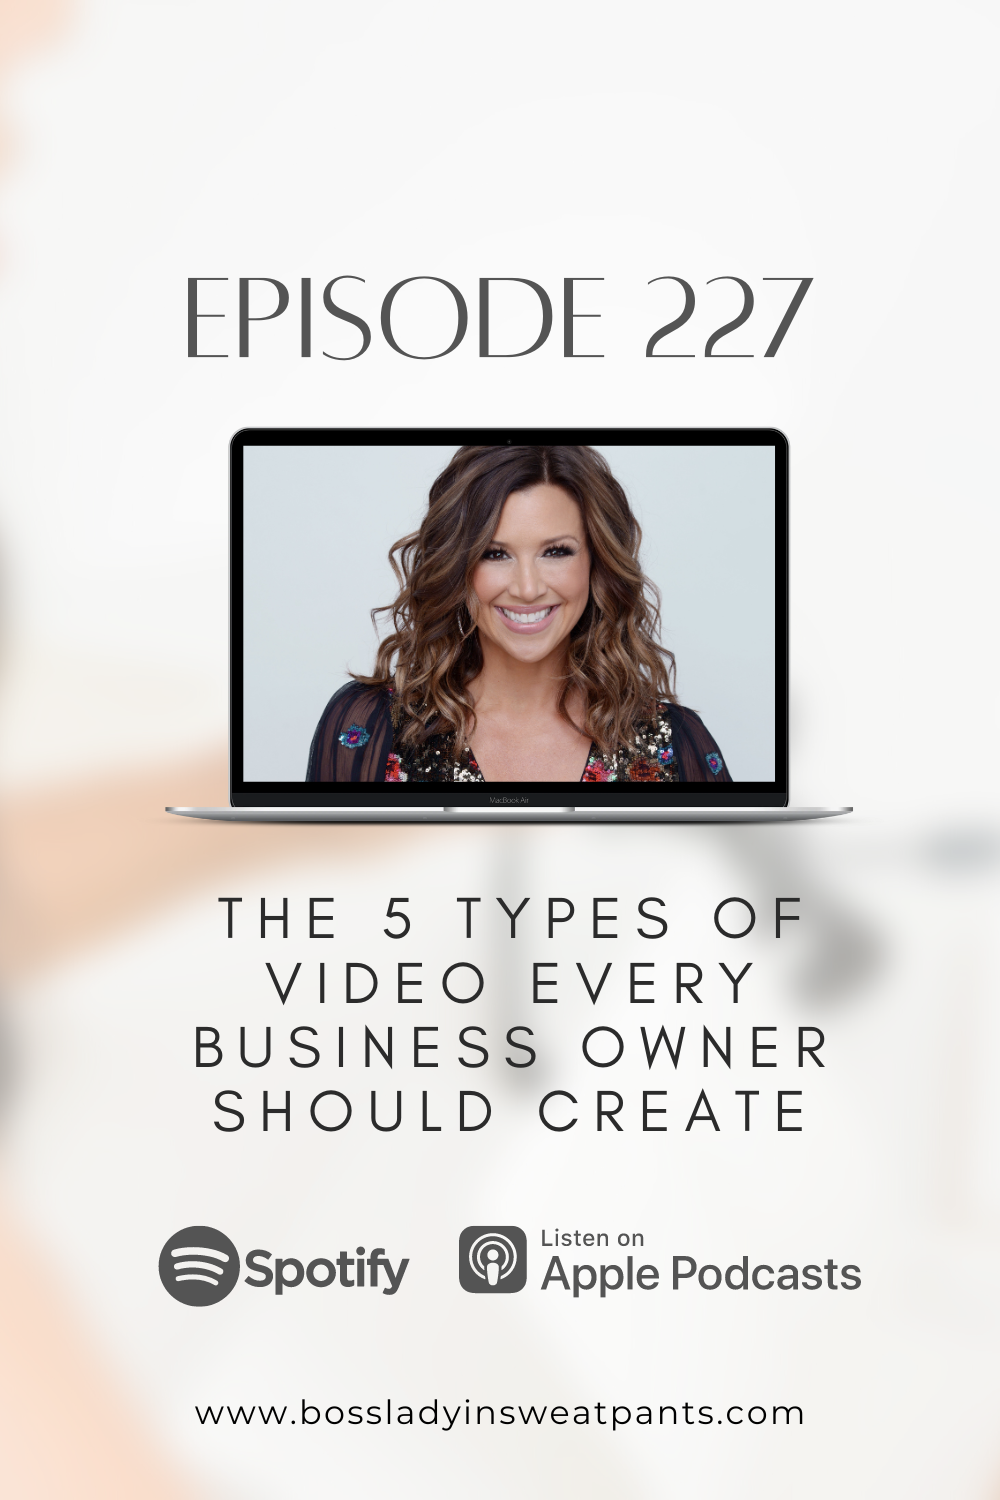 computer mockup graphic with a photo of Keri Murphy | The 5 types of video every business owner should create | spotify and apple podcast graphic elements | www.bossladyinsweatpants.com